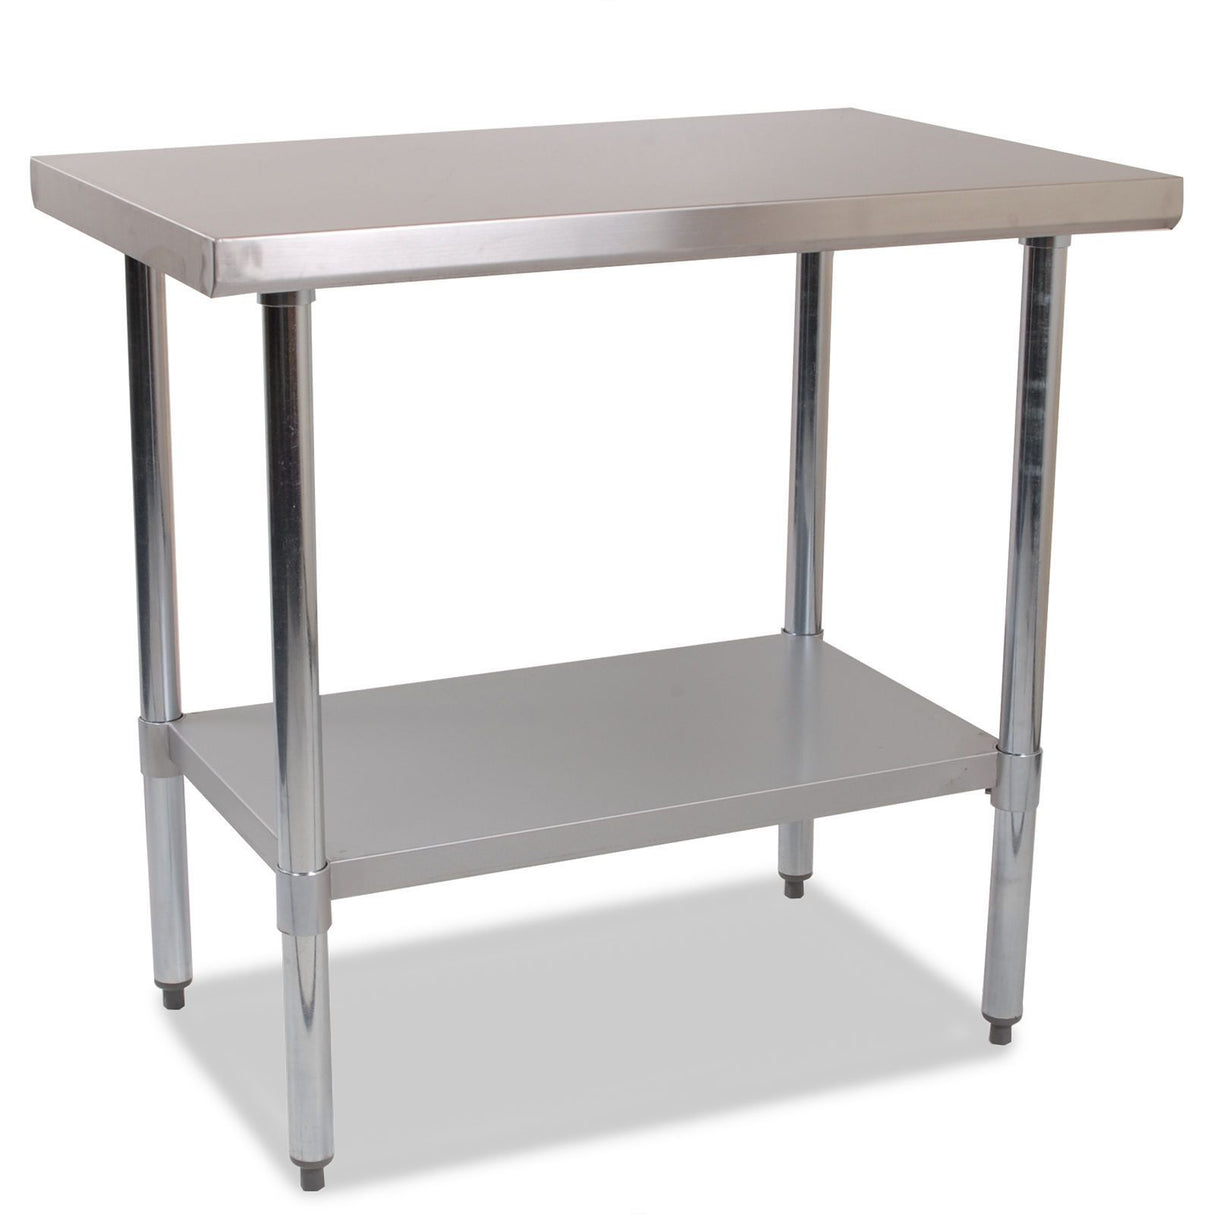 Premium Stainless Steel Centre Table - 1800mm